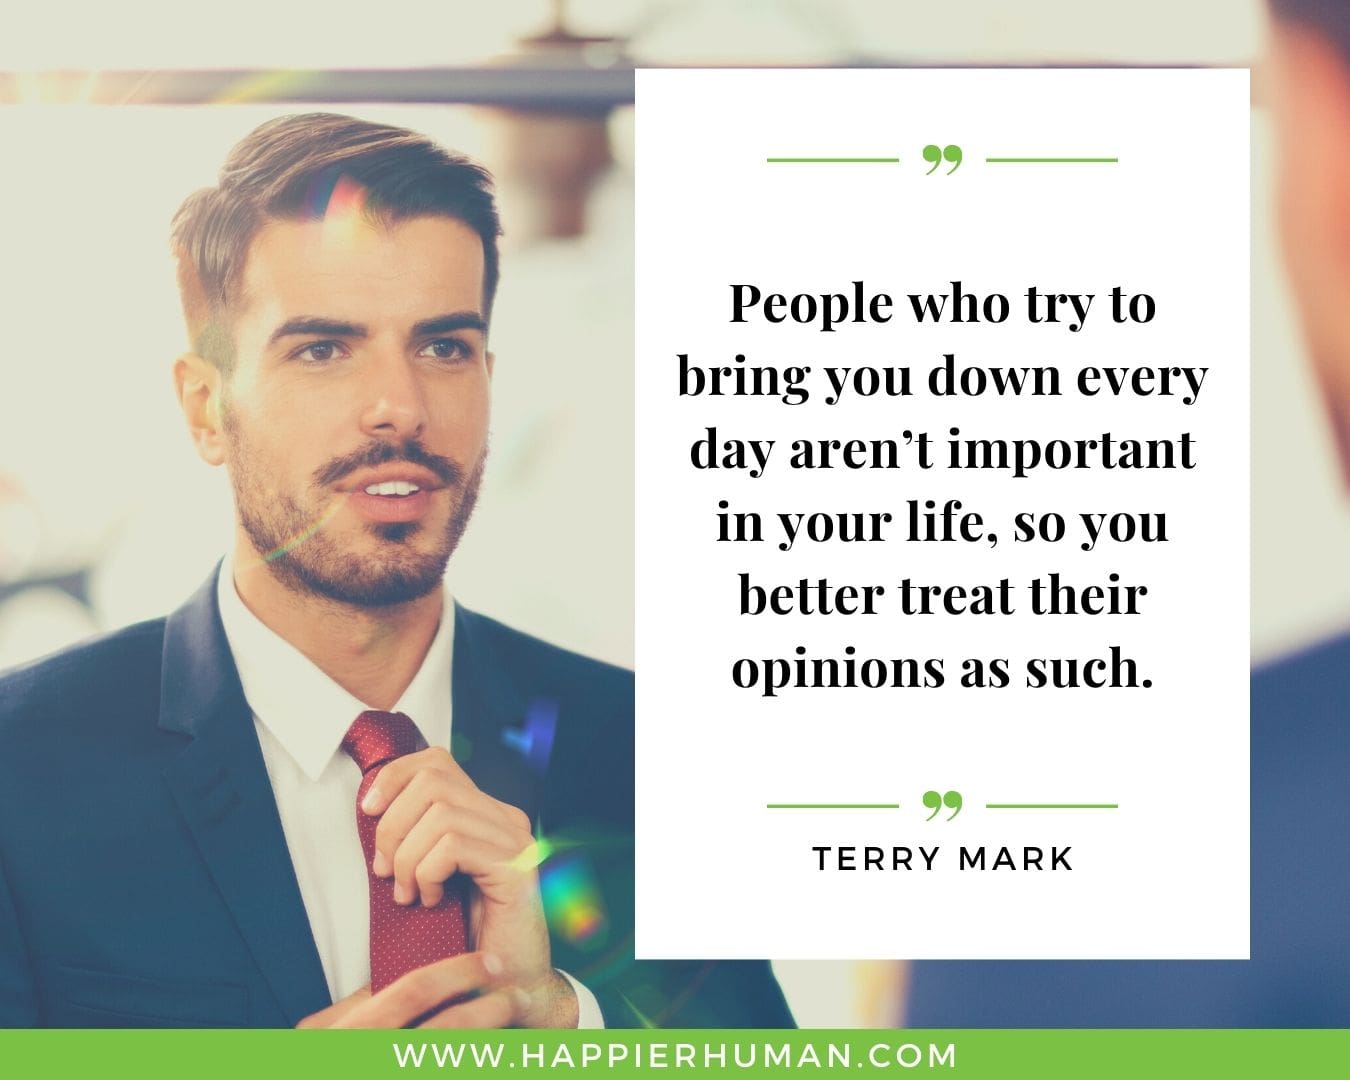 Toxic People Quotes - “People who try to bring you down every day aren’t important in your life, so you better treat their opinions as such.” – Terry Mark